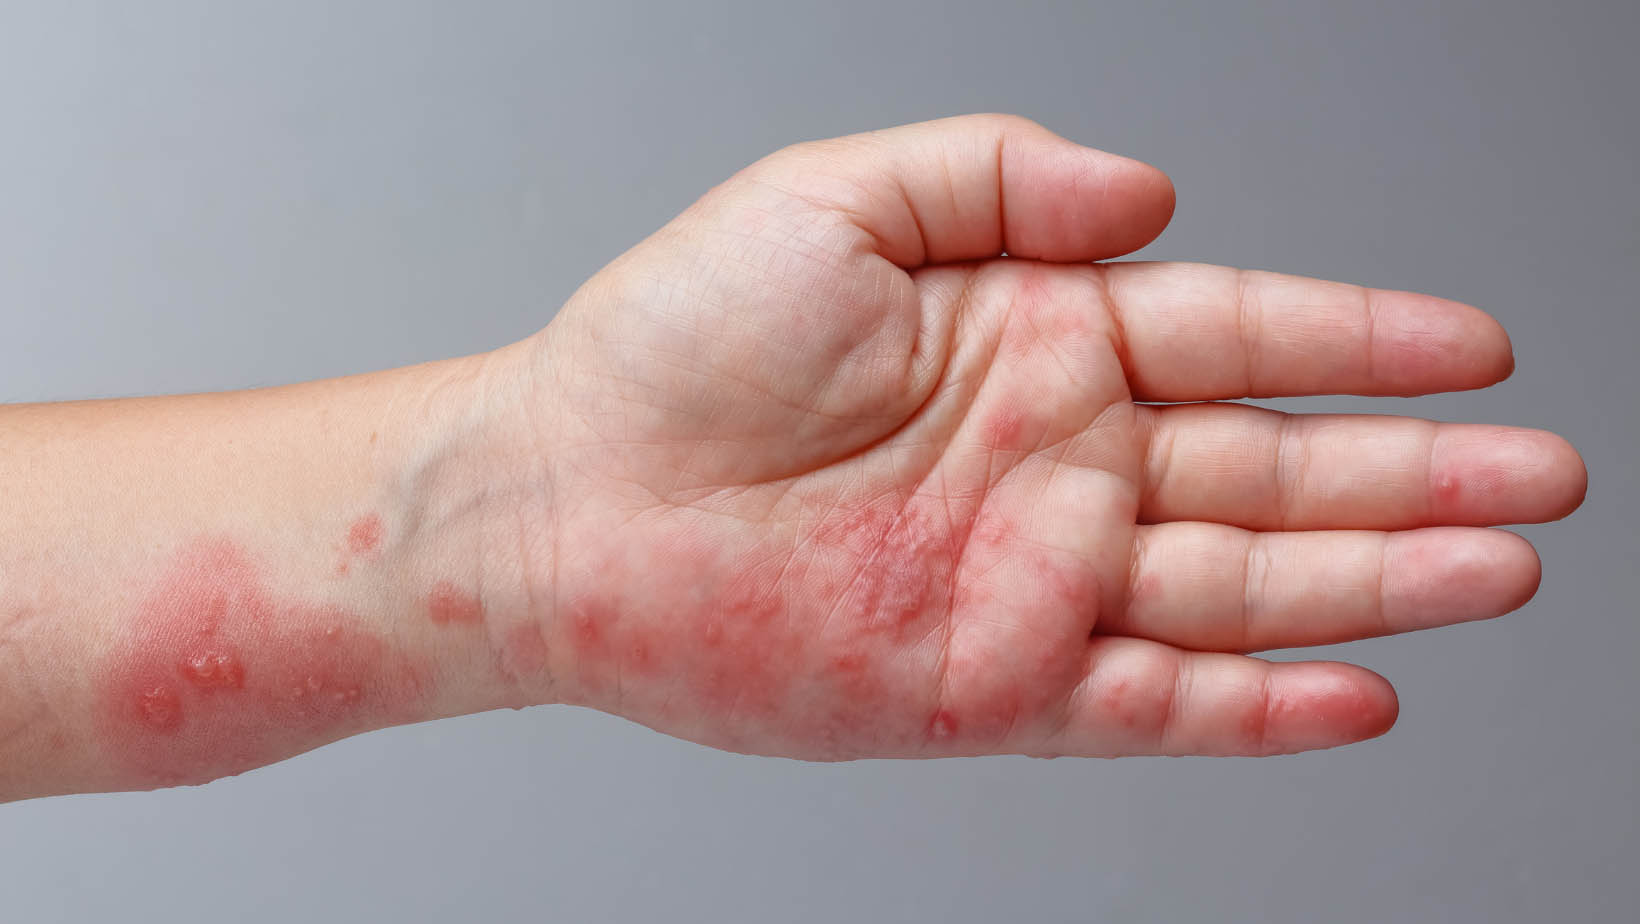 photo of hand with rashes